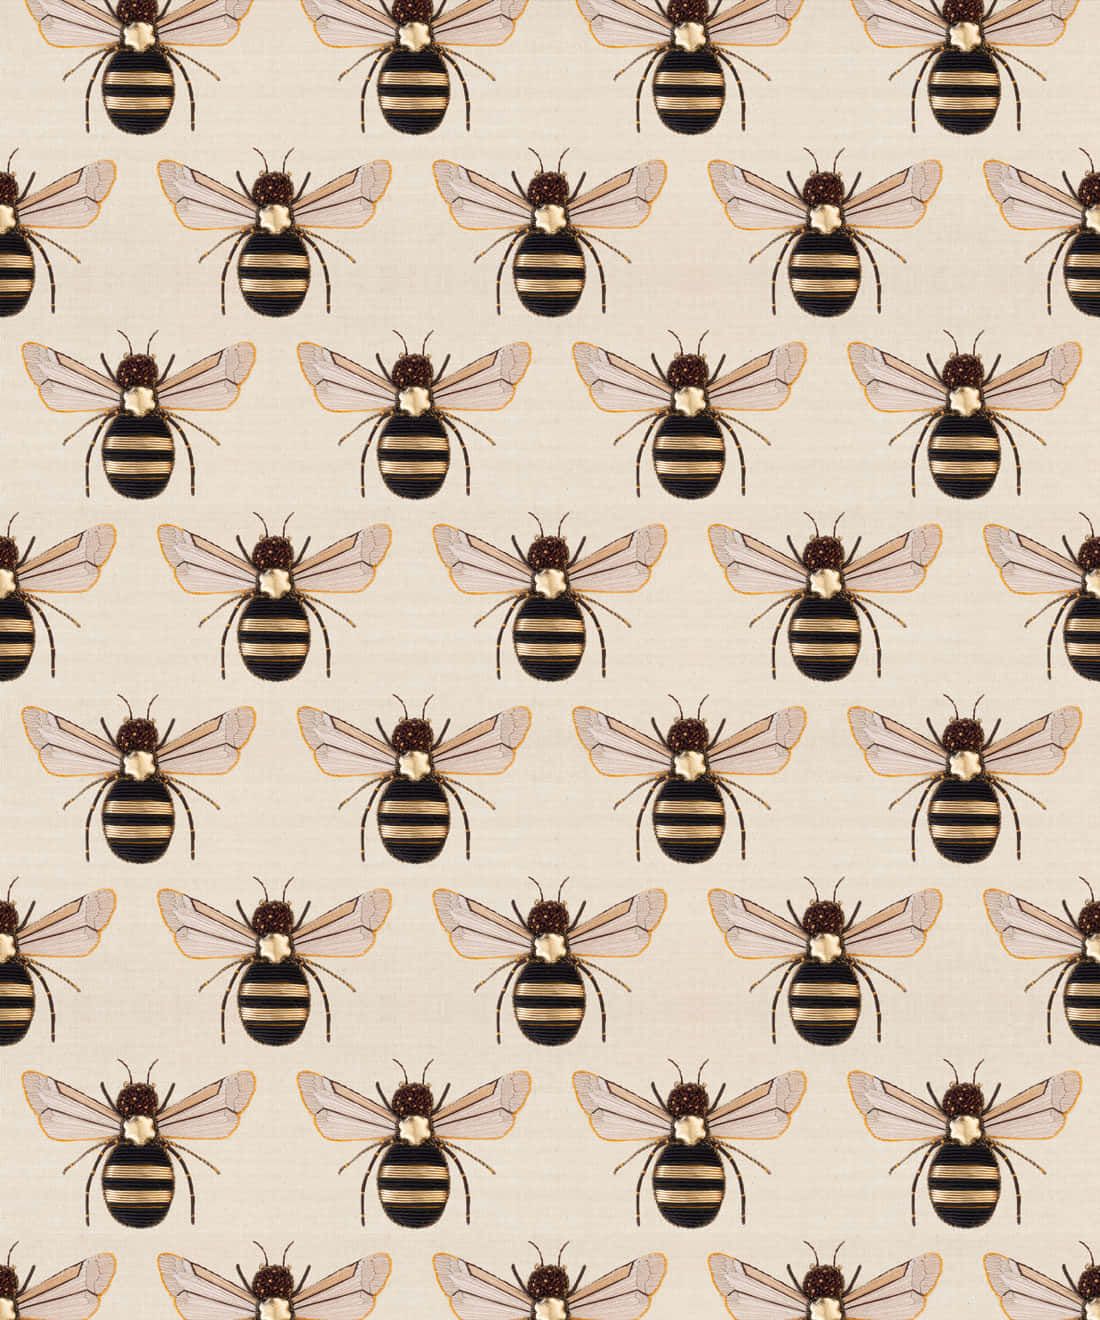 Download Bee Wall Insects Decor Wallpaper